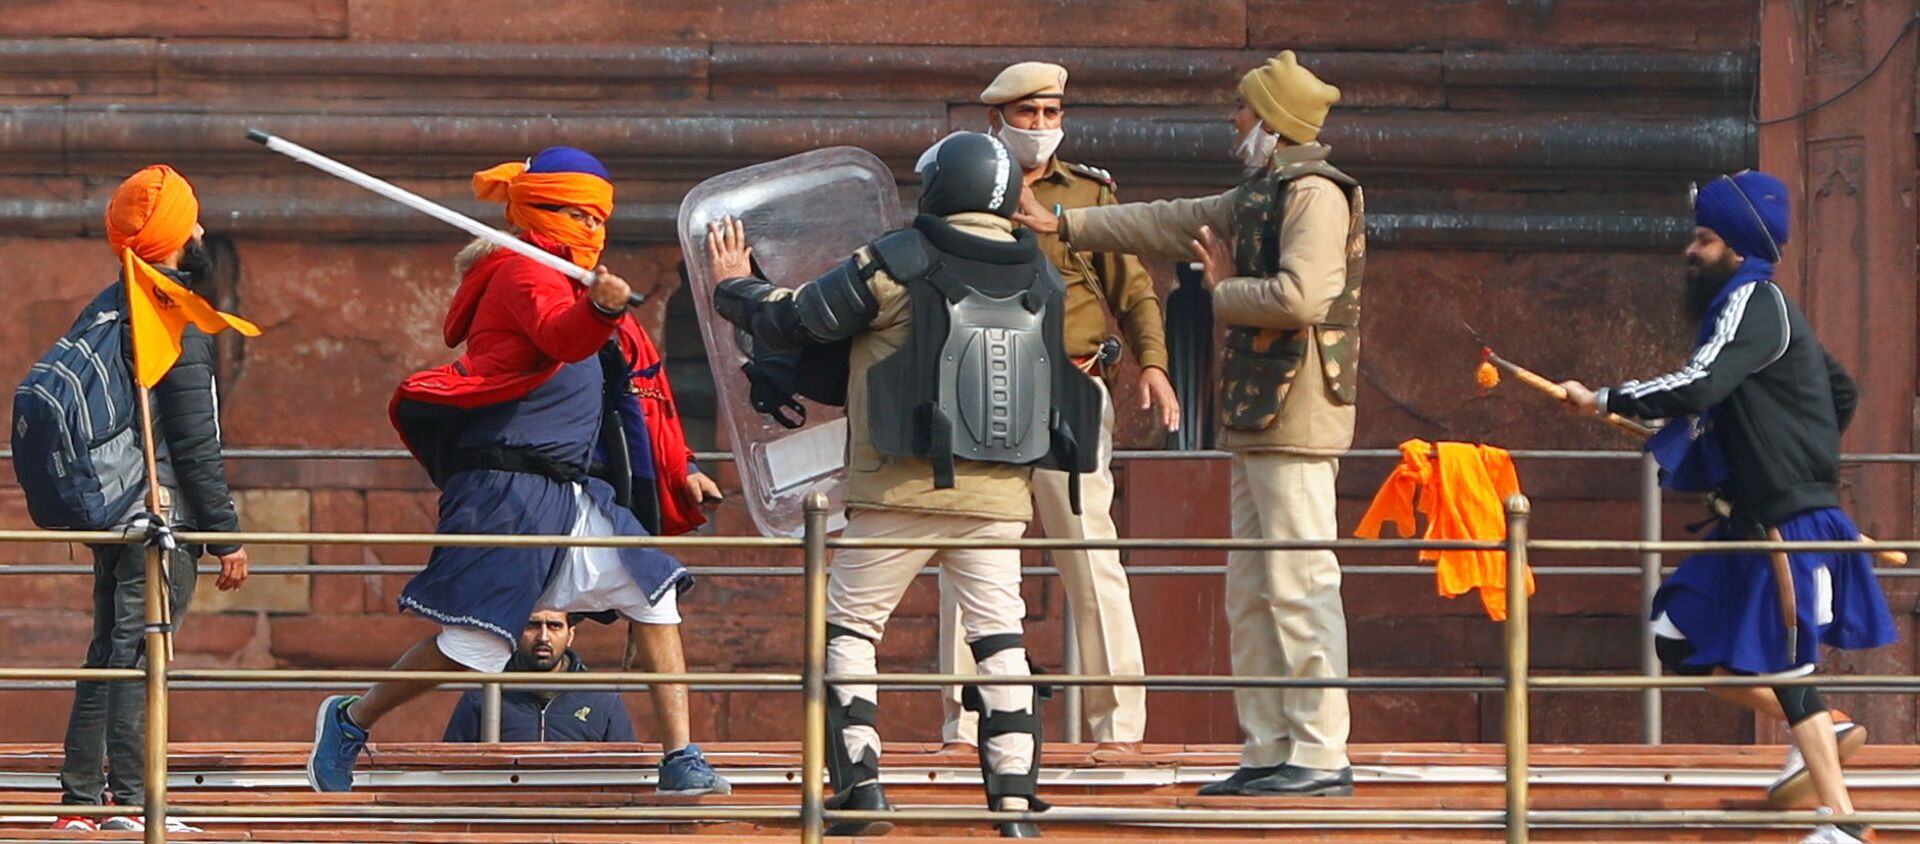 A Nihang (sikh warrior) beats a policeman with a baton during a protest against farm laws introduced by the government, at the historic Red Fort in Delhi, India, January 26, 2021 - Sputnik International, 1920, 09.02.2021